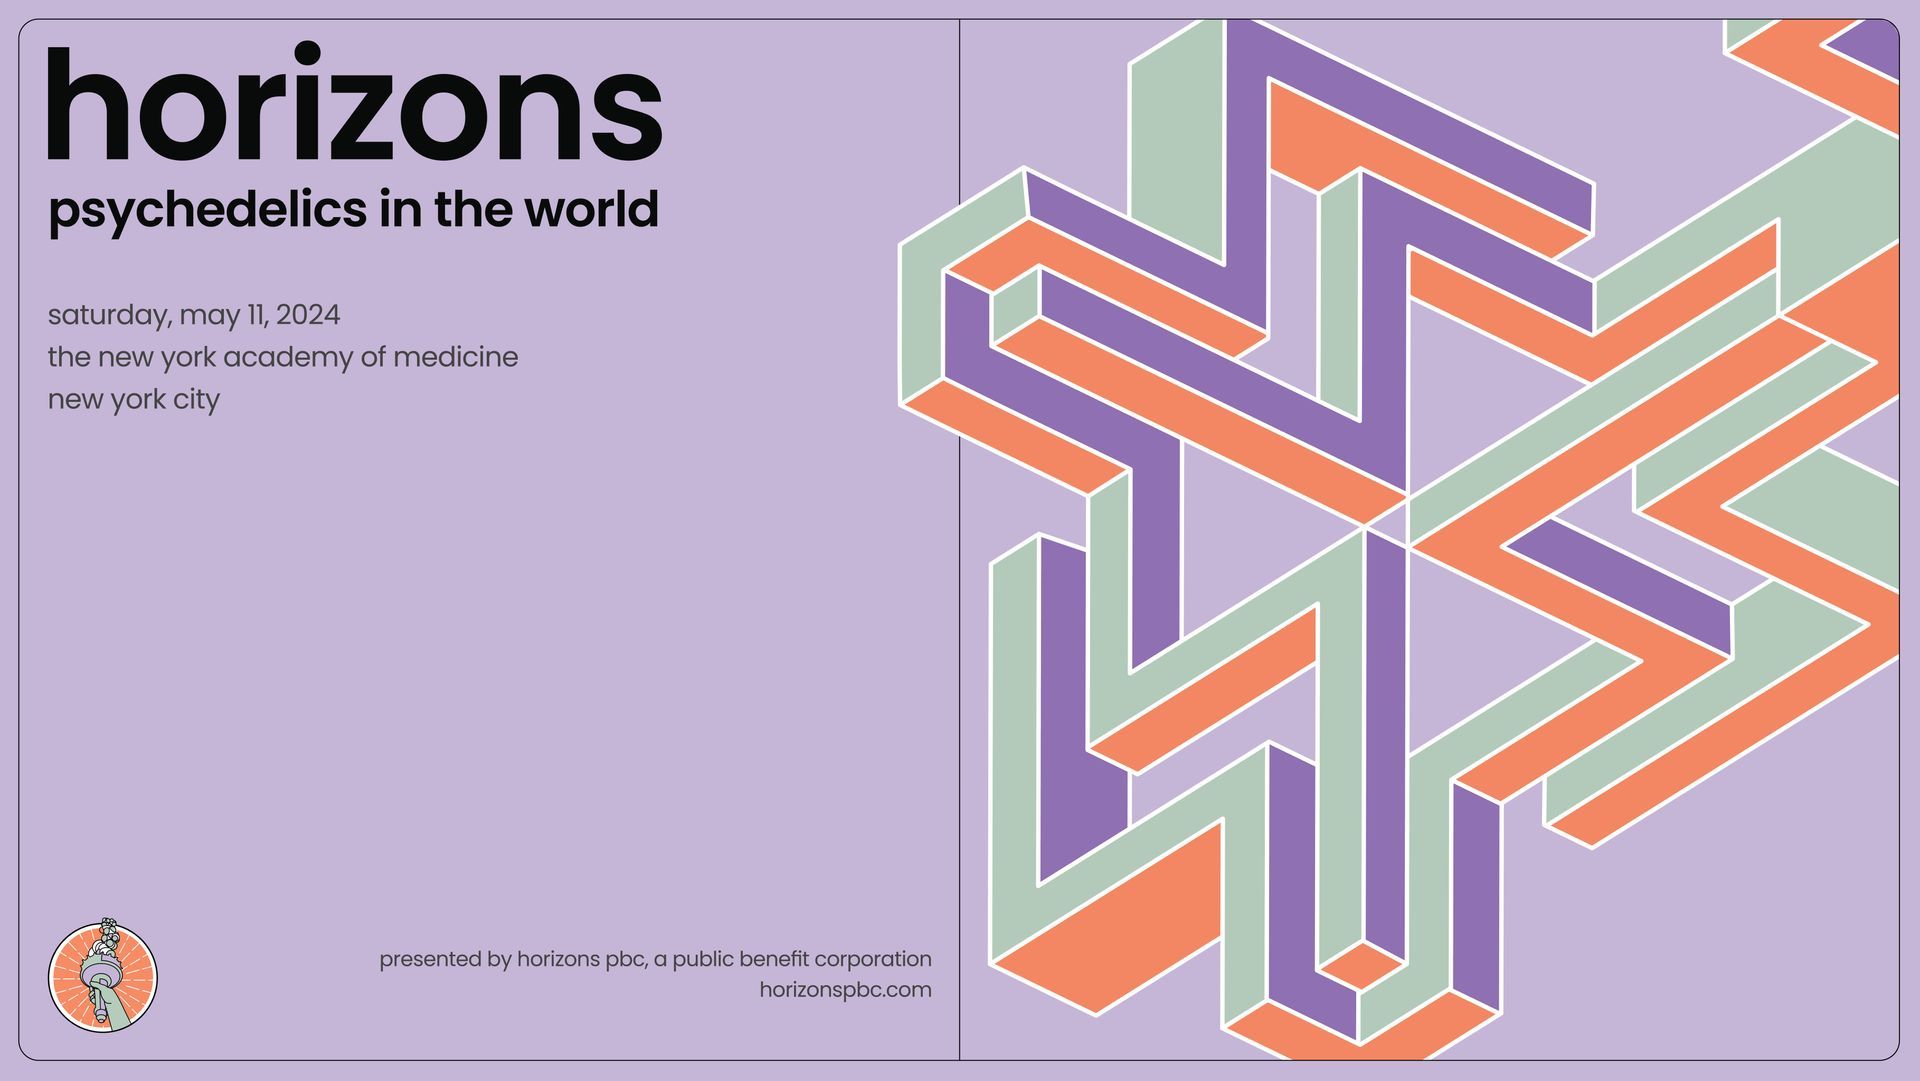 A poster for horizons psychedelics in the world